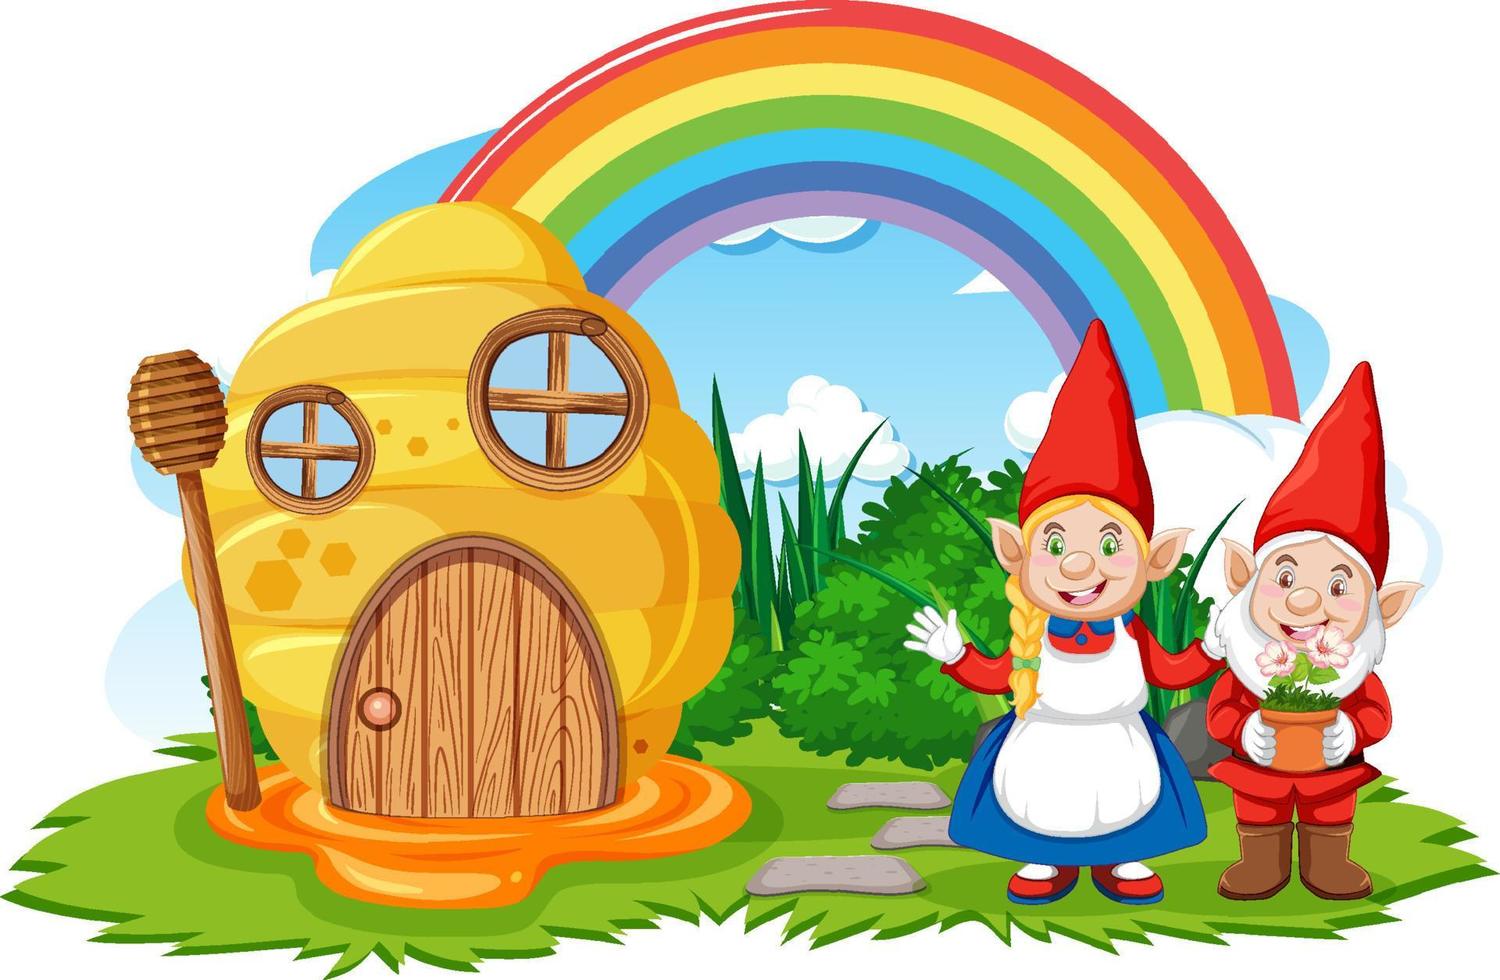 Fantasy bee hive house with rainbow in the sky vector